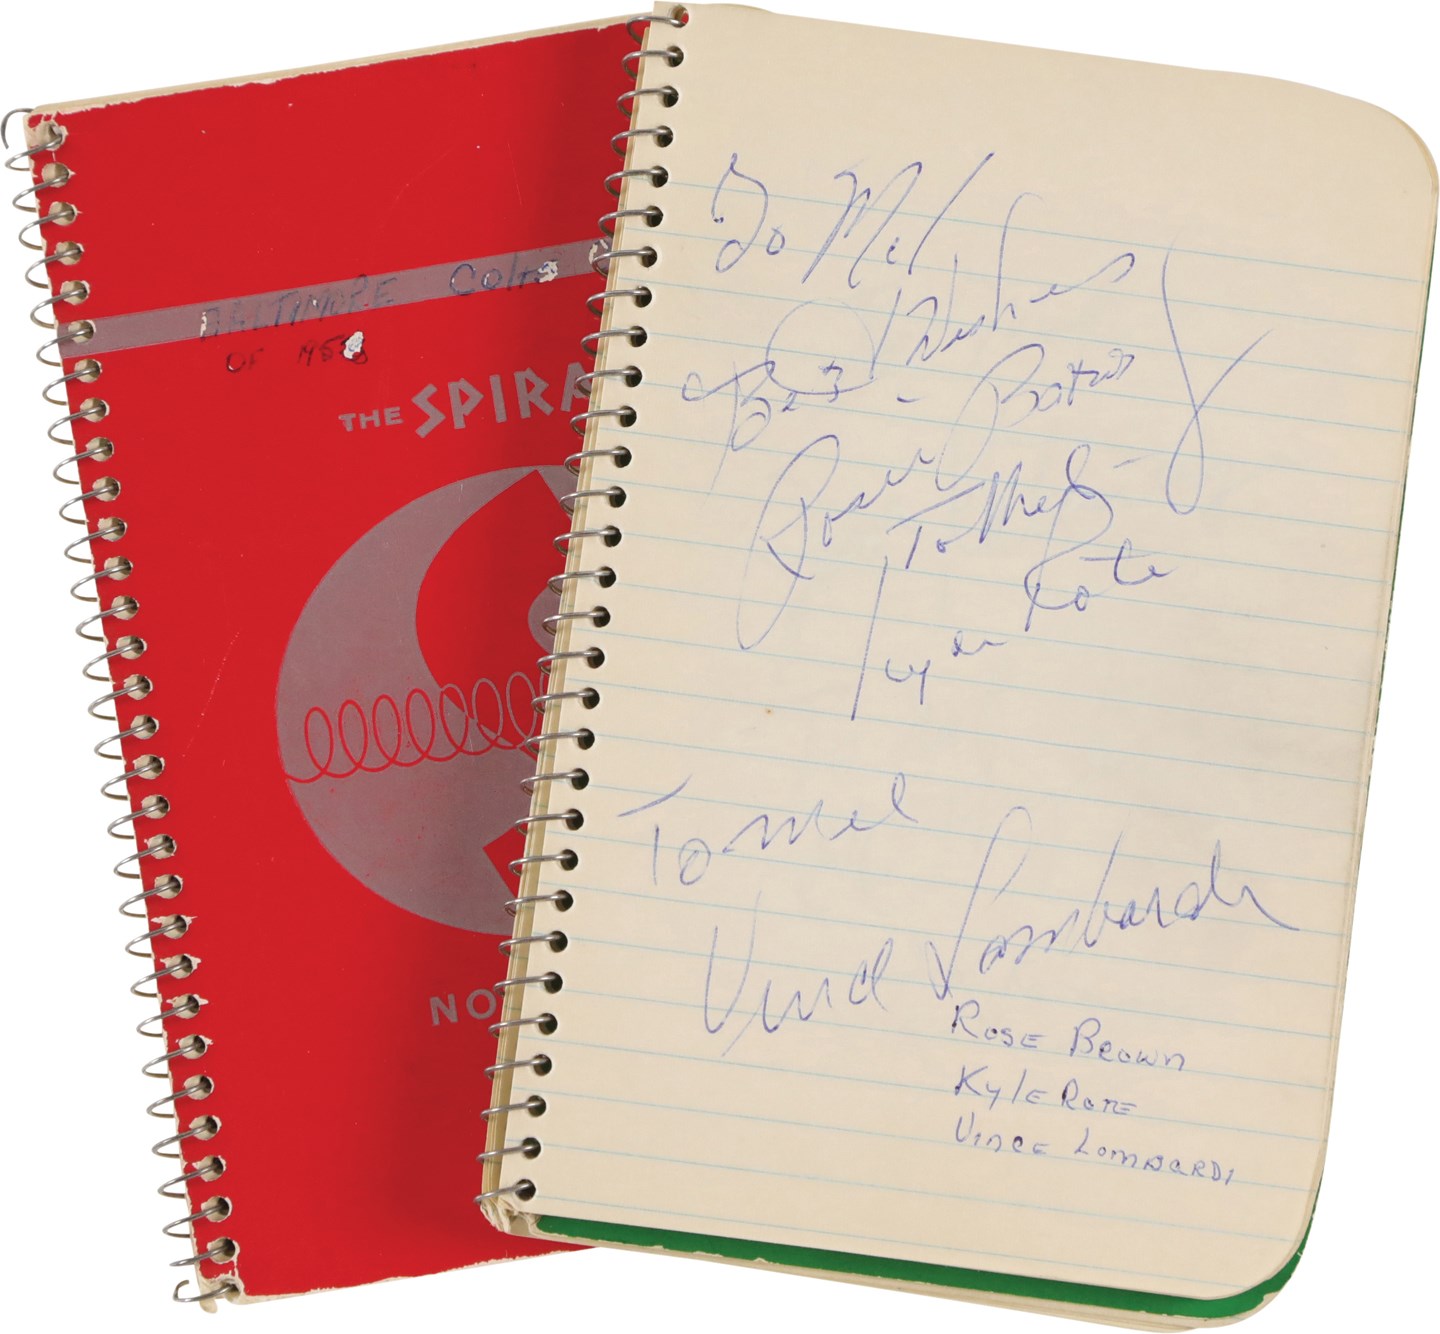 Football - 1958 New York Giants vs Baltimore Colts "The Greatest Game Ever Played" Autograph Notebooks w/Vince Lombardi